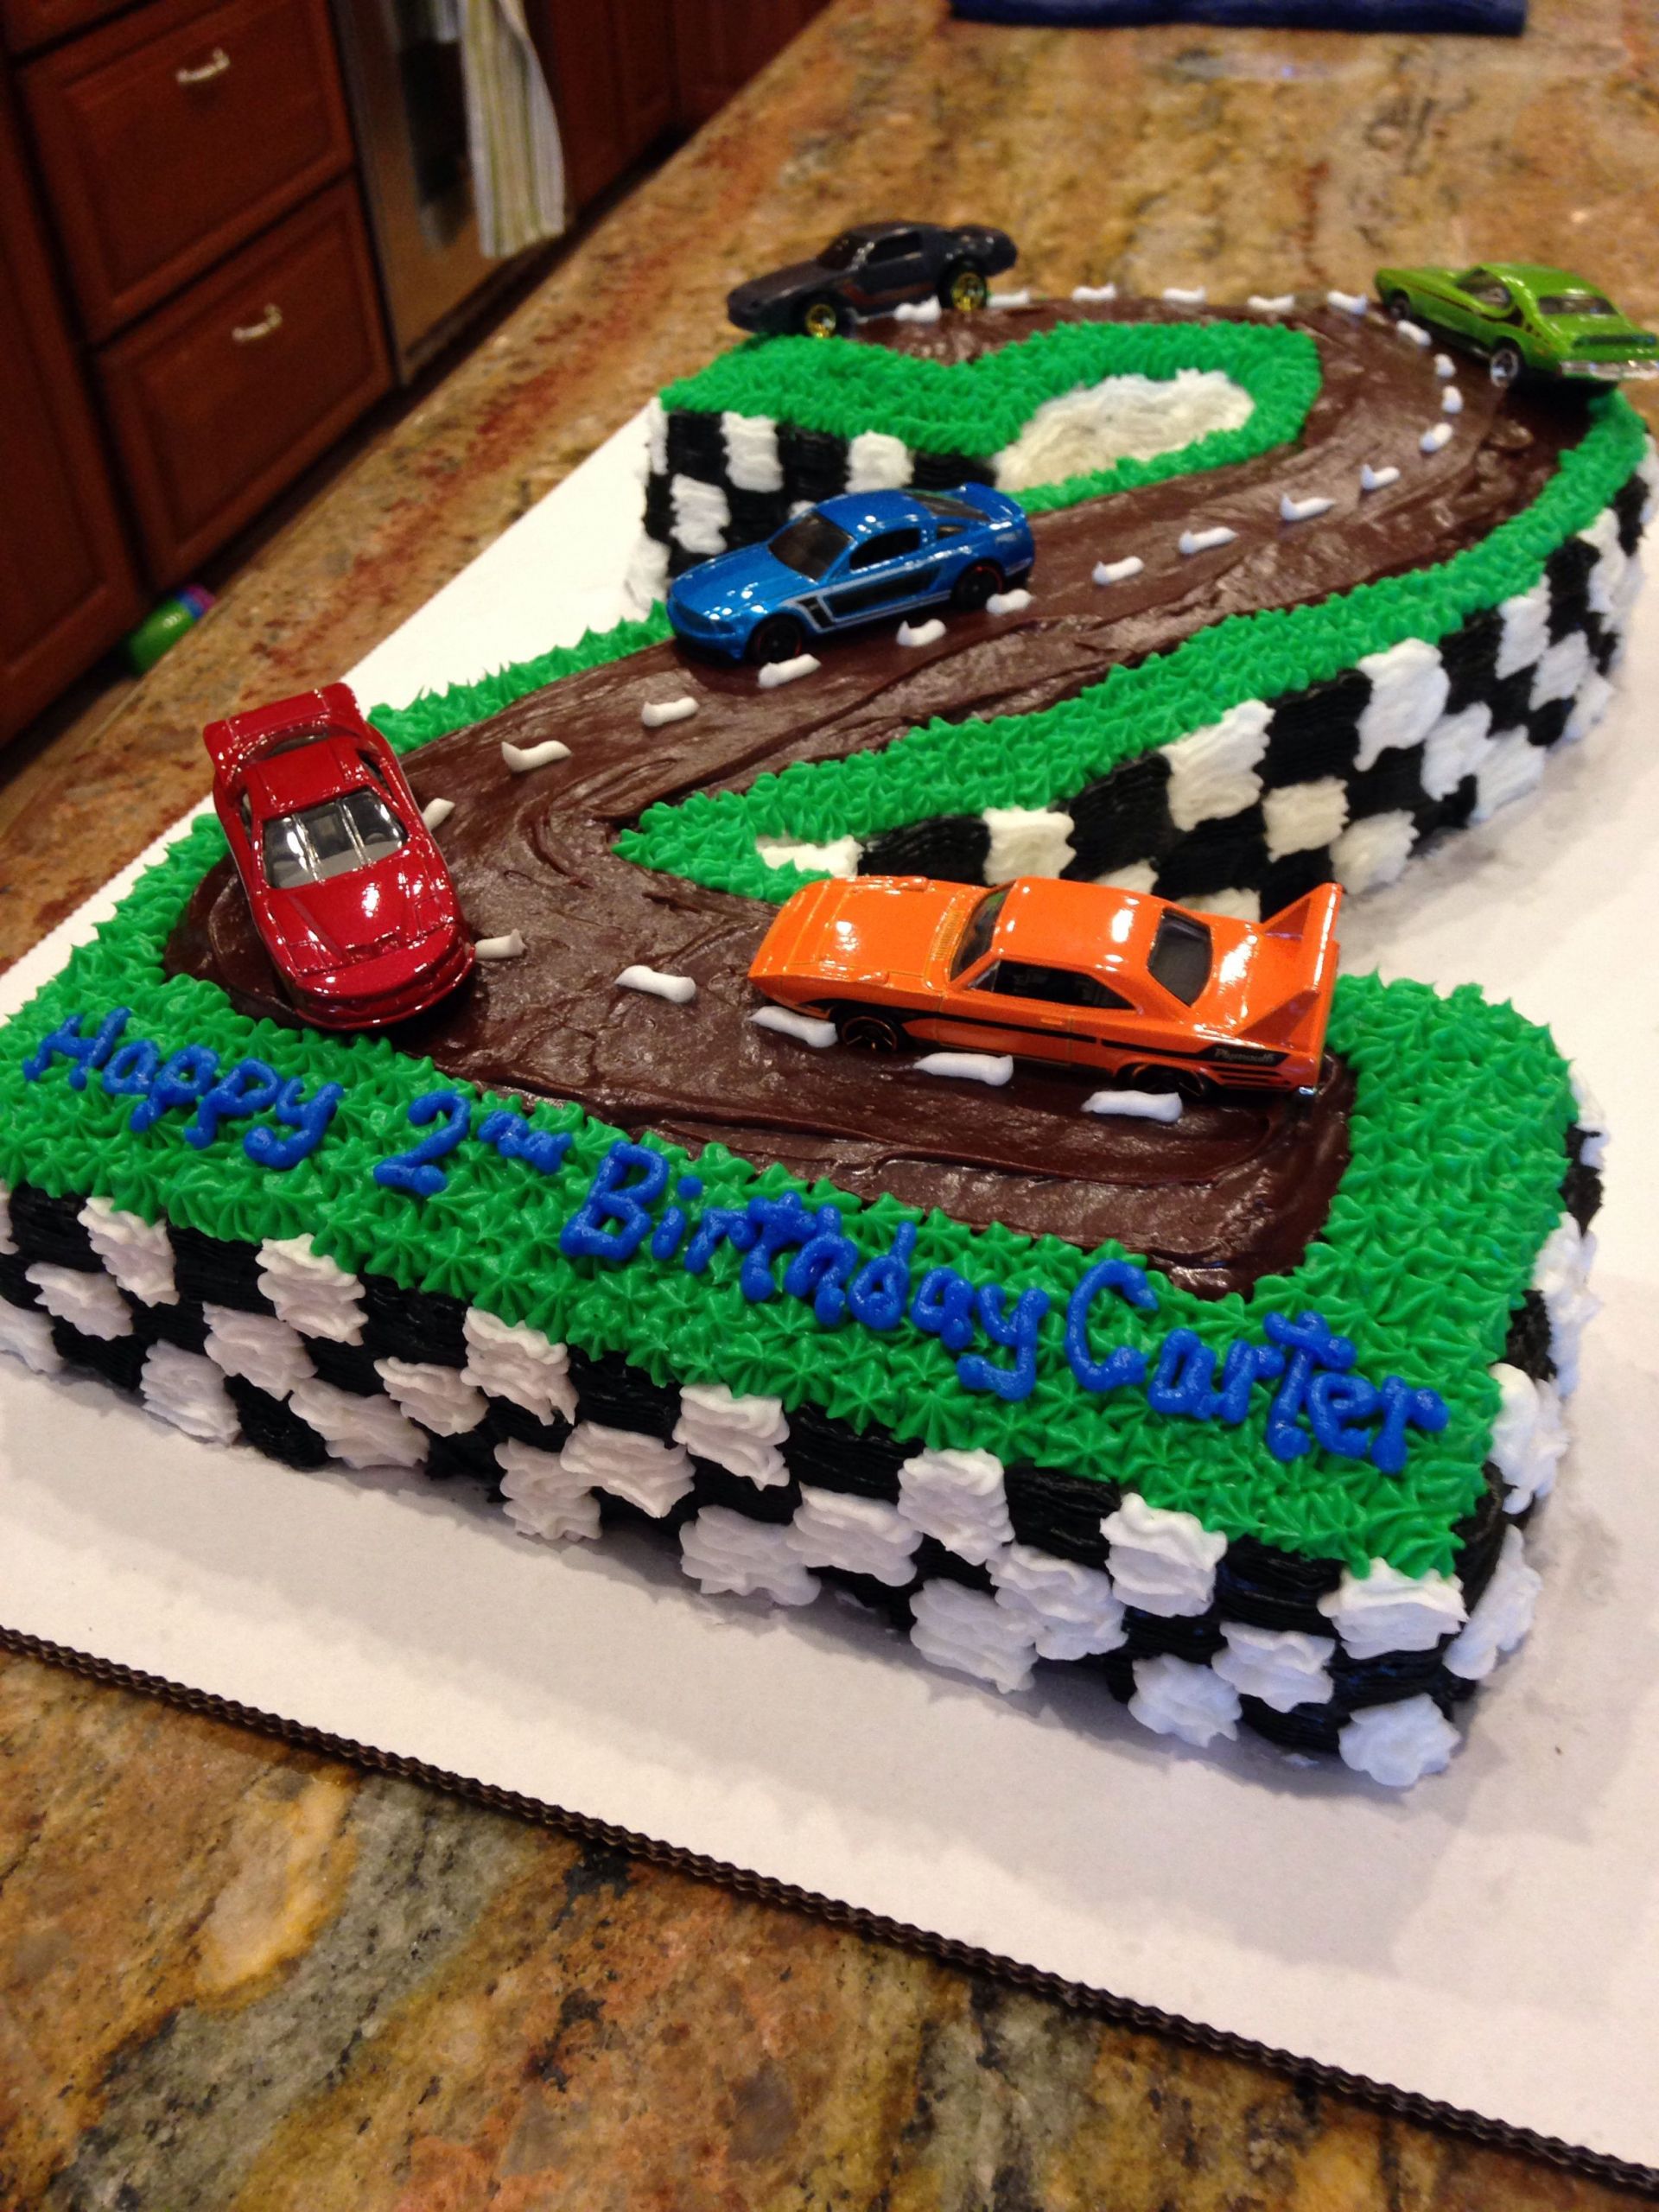 Birthday Gift Ideas For Two Year Old Boy
 Cars happy birthday cake for two year old used matchbox